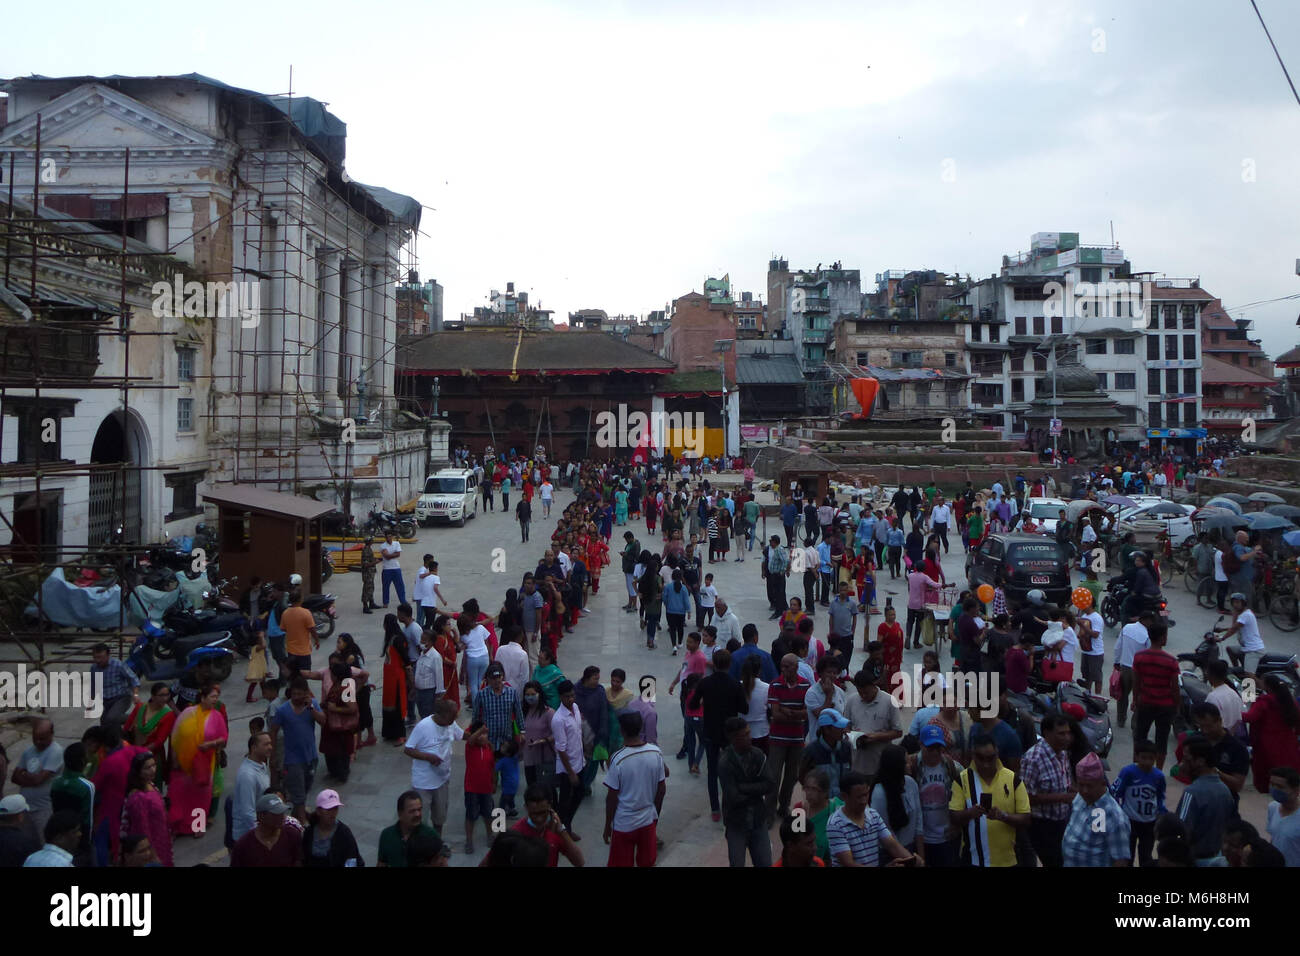 Lots of people in Durbar Square with visible damages after the earthquake, Kathmandu, Nepal Stock Photo